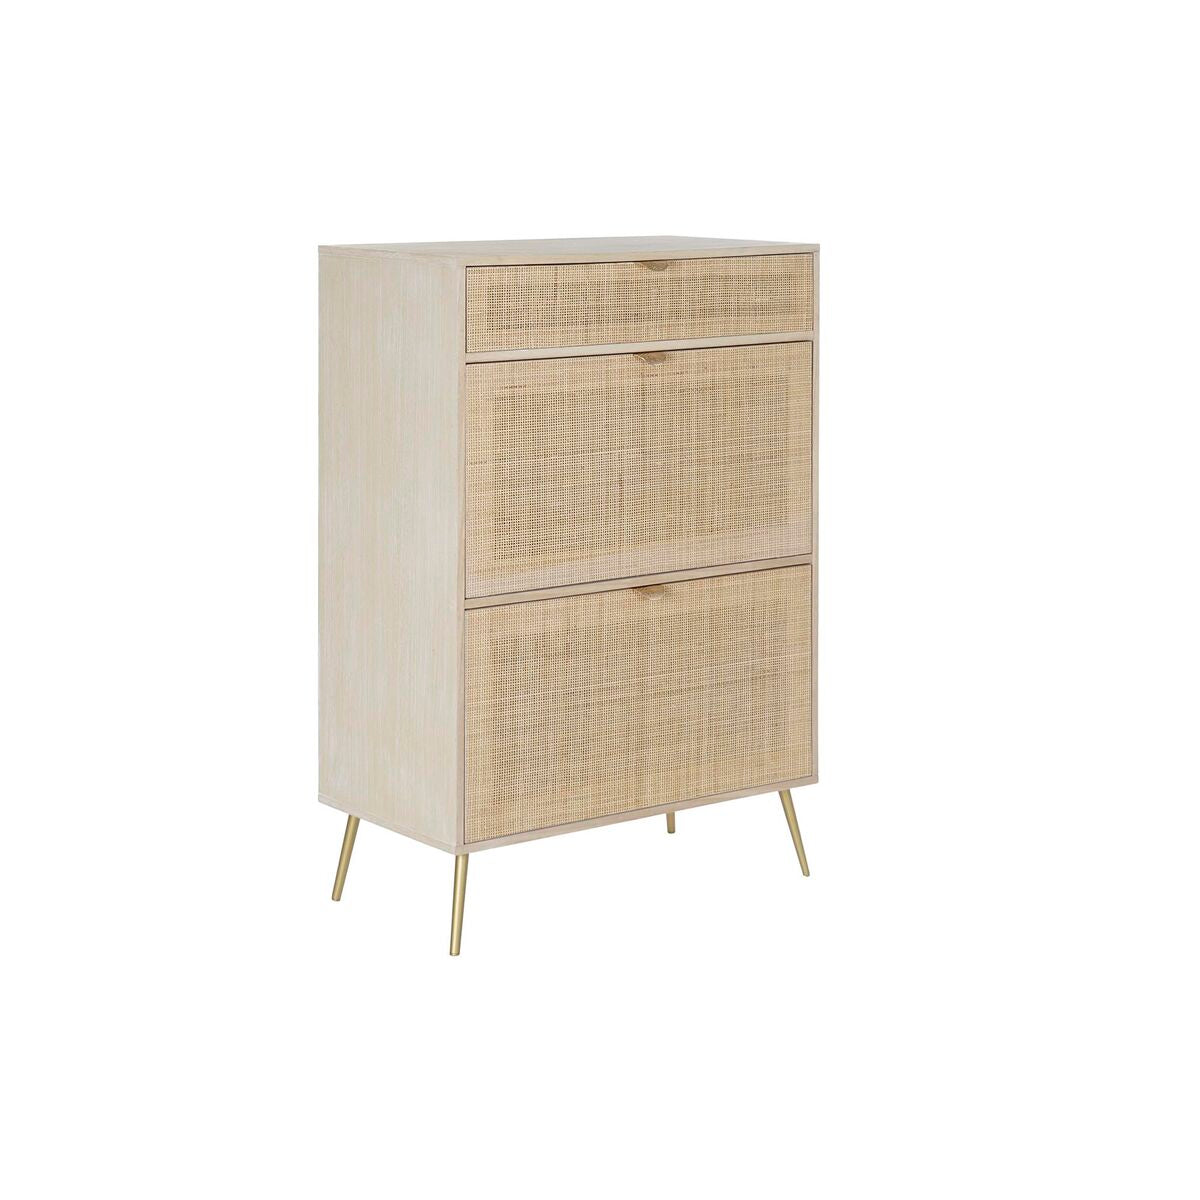 Shoe Rack in Wood and Rattan (75 x 40 x 112,5 cm)